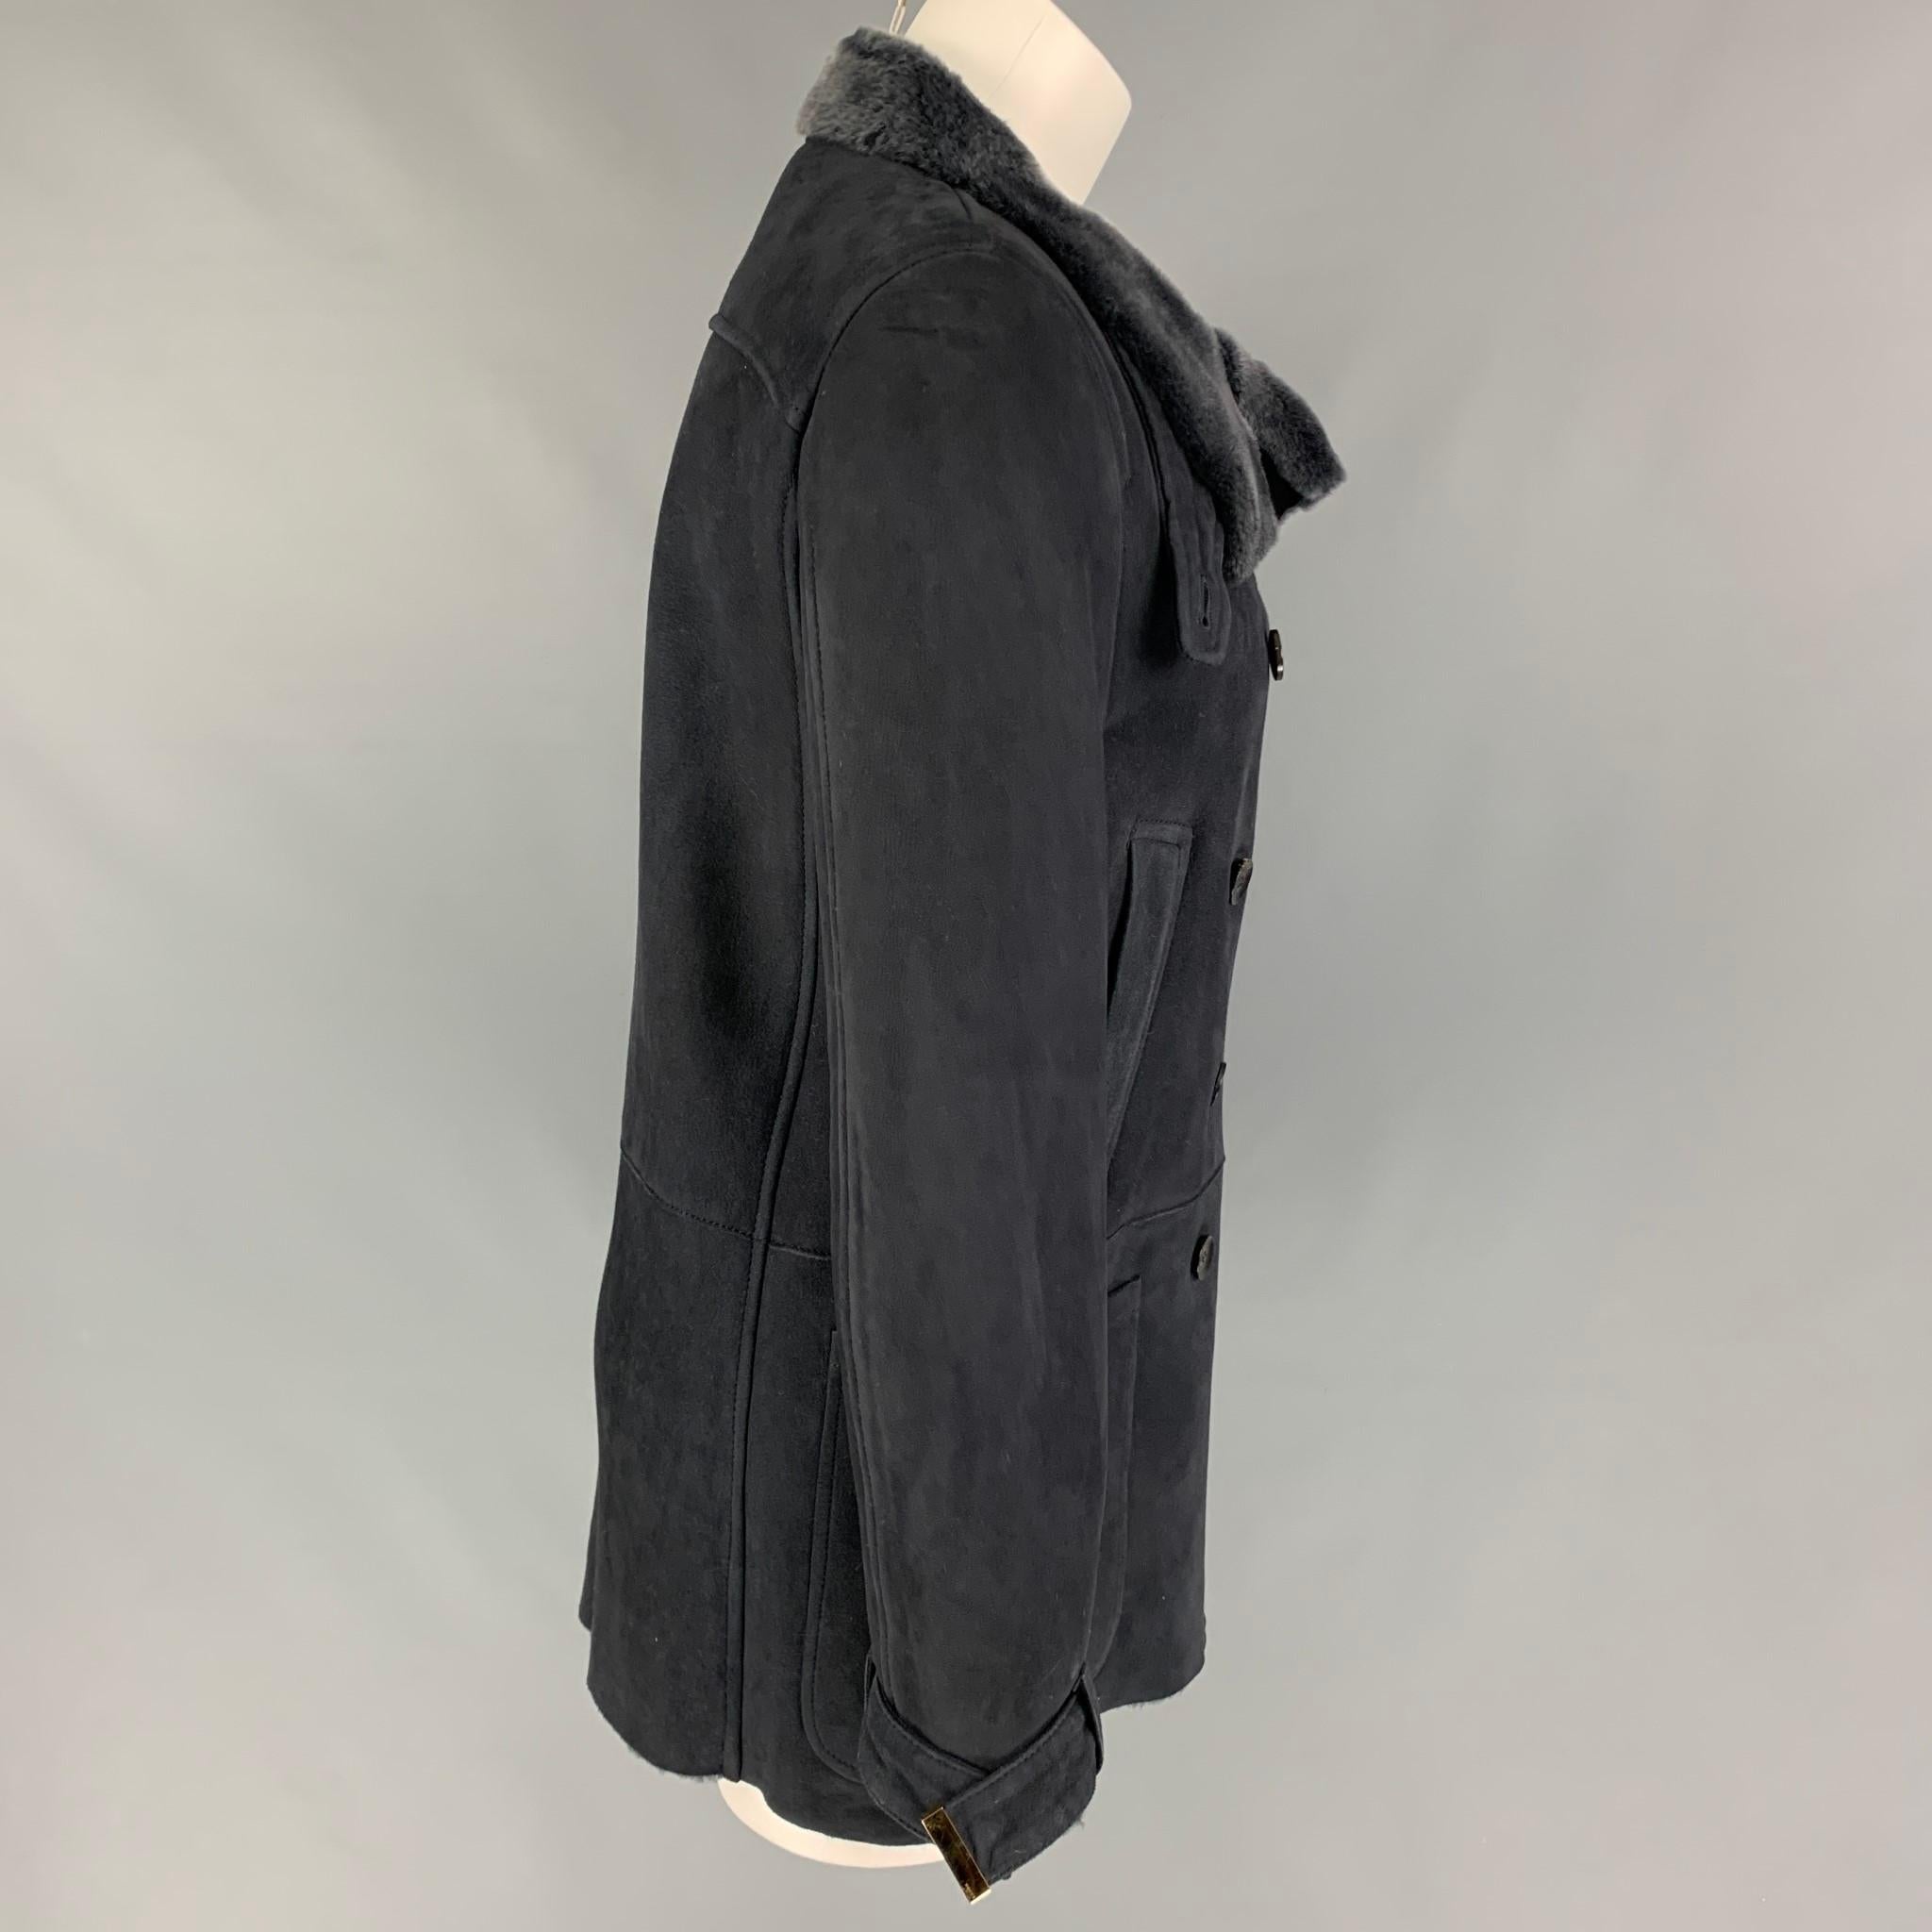 GUCCI by Tom Ford coat comes in a grey shearling with a fur interior featuring front pockets, gold tone hardware, strap cuffs, and a double breasted closure. Made in Italy. 

Excellent Pre-Owned Condition.
Marked: 42

Measurements:

Shoulder: 15.5